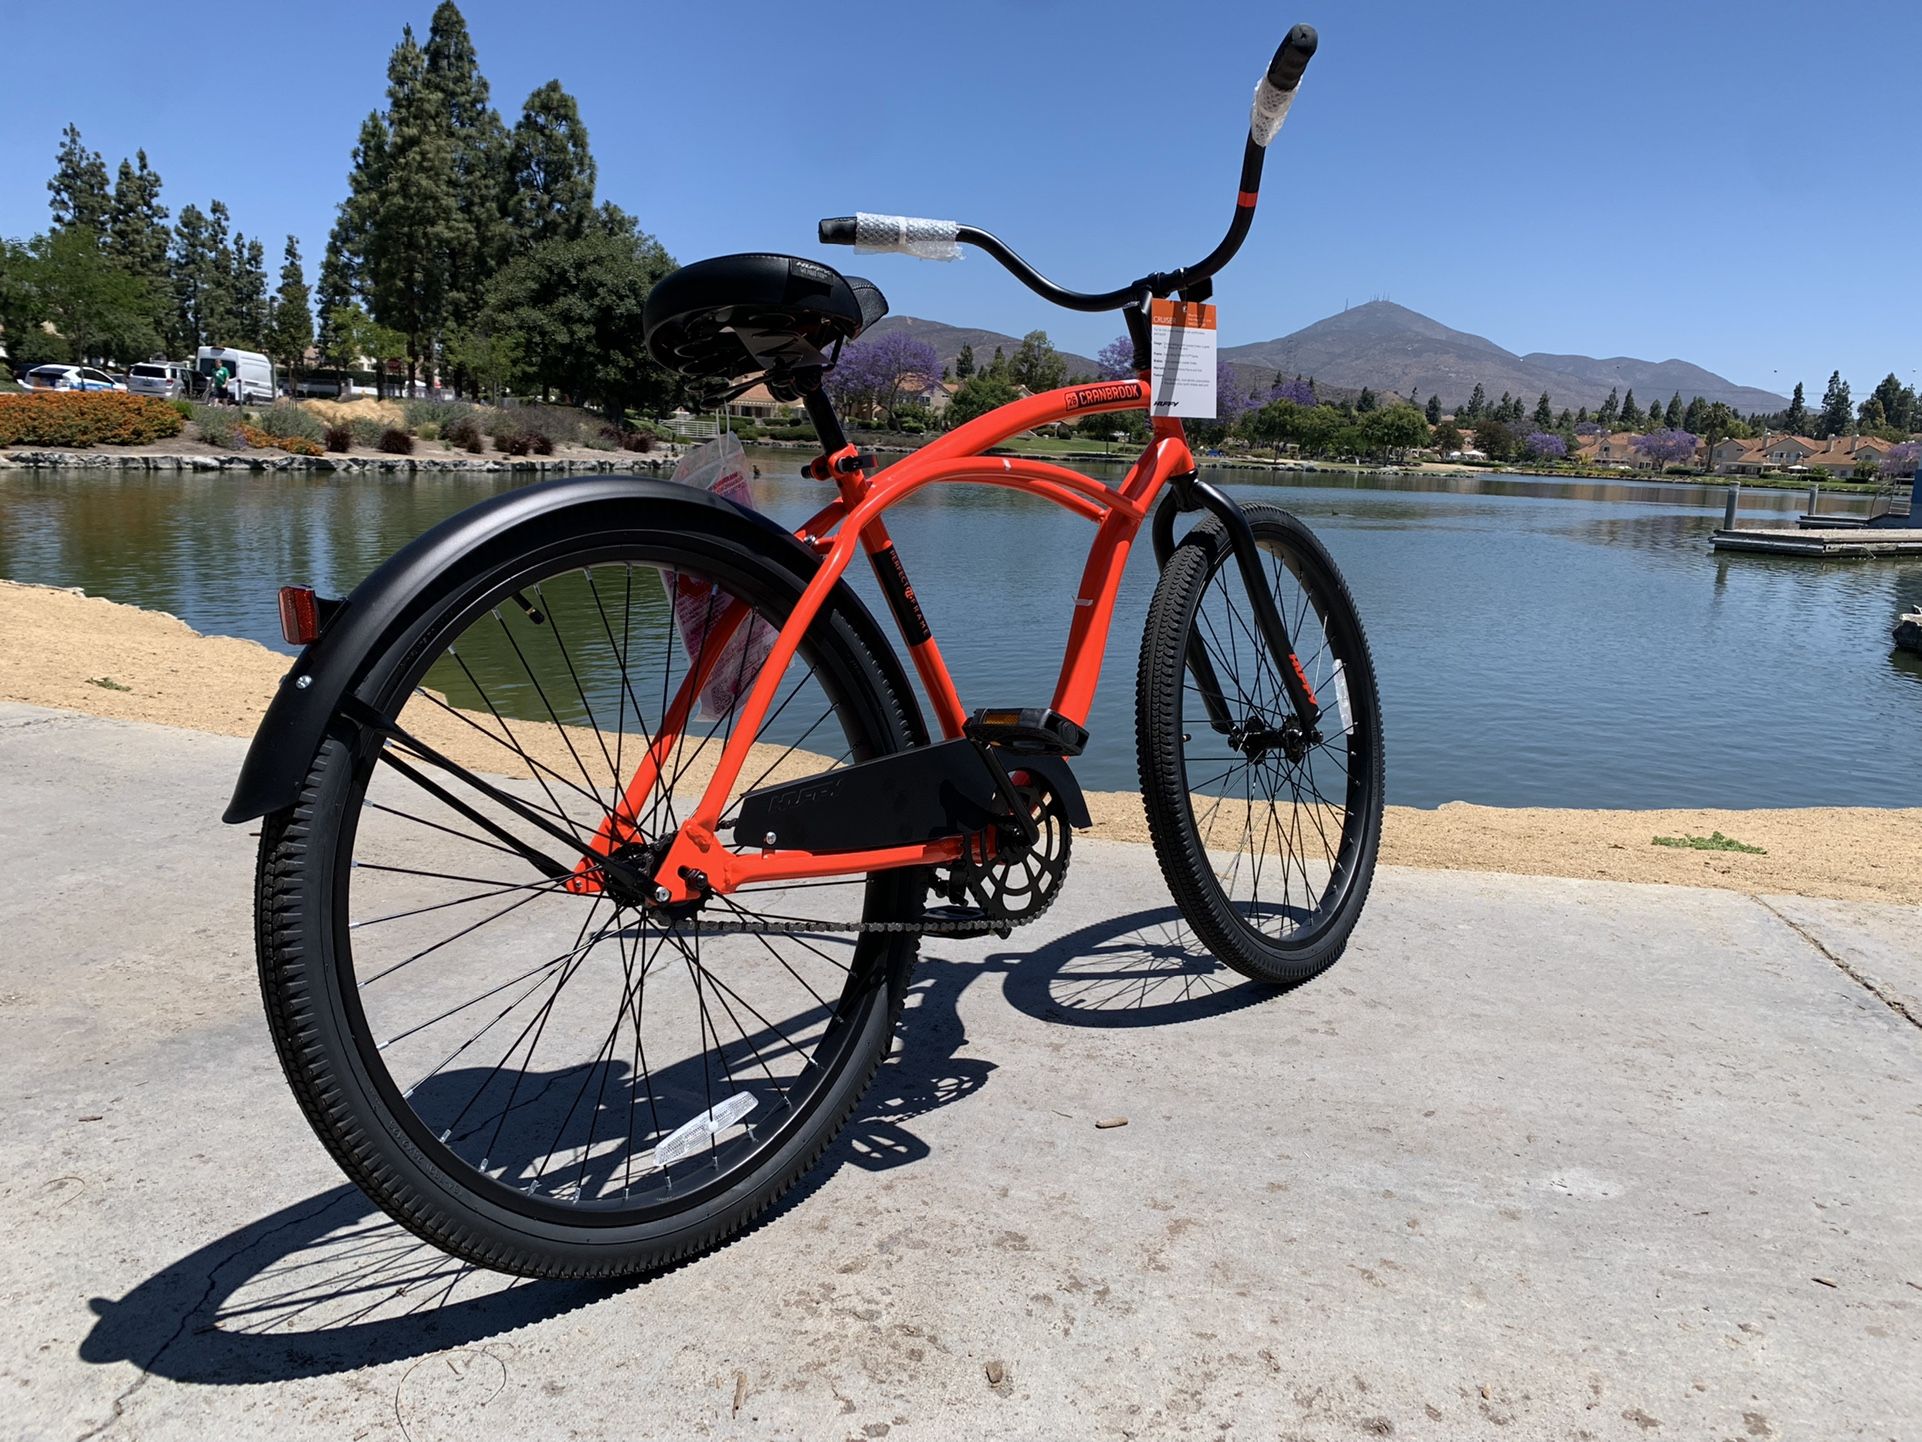 New Awesome 😎 Men’s Hot 🥵 Orange Beach Cruiser Bike Bicycle Standard Adult Size 26” Tires  Father’s Day 